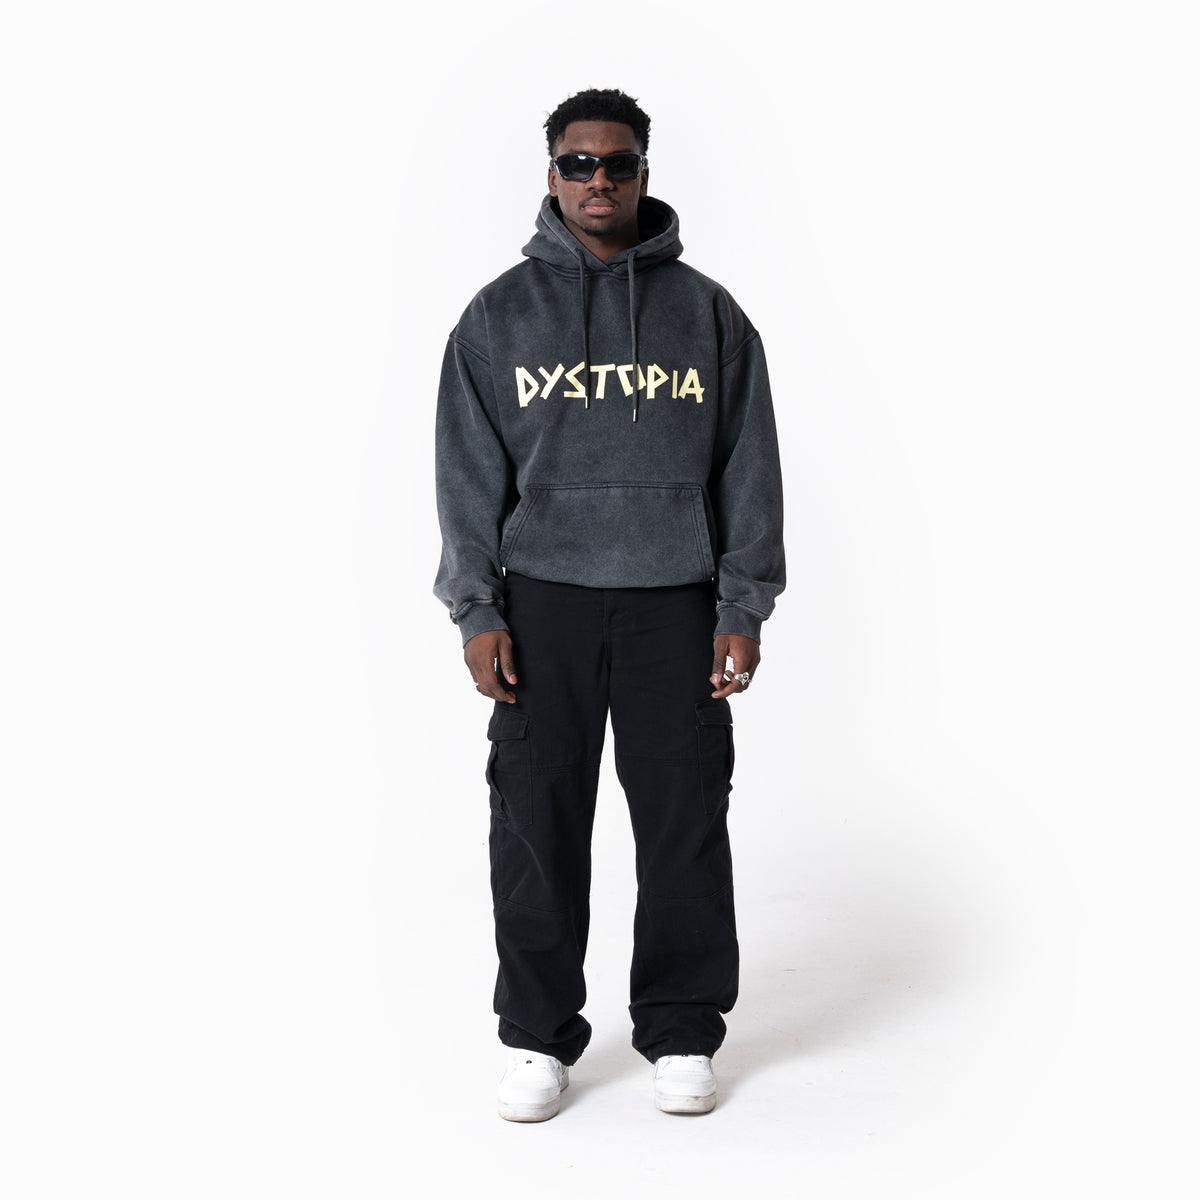 Dystopia Washed Tape Logo Hoodie